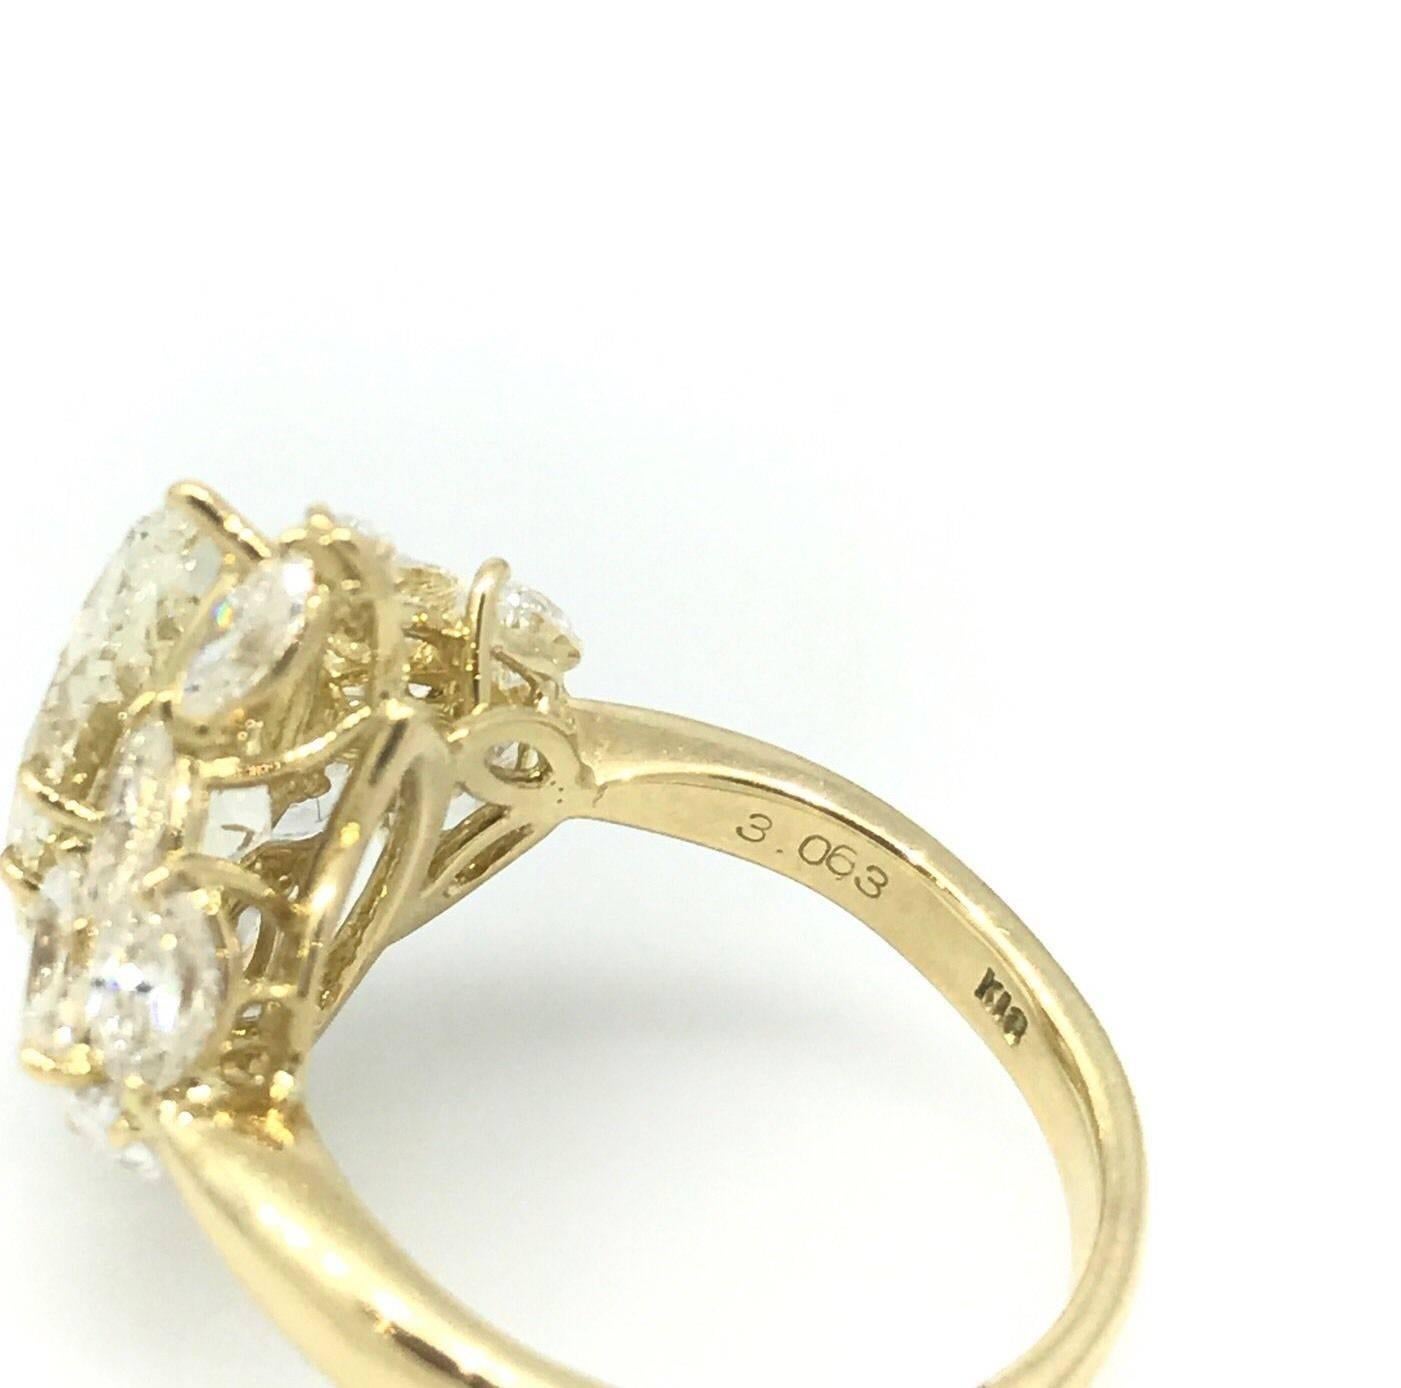 3.06 Carat Marquise Diamond Ring with Marquise Side Diamonds in Yellow Gold In Excellent Condition For Sale In La Jolla, CA